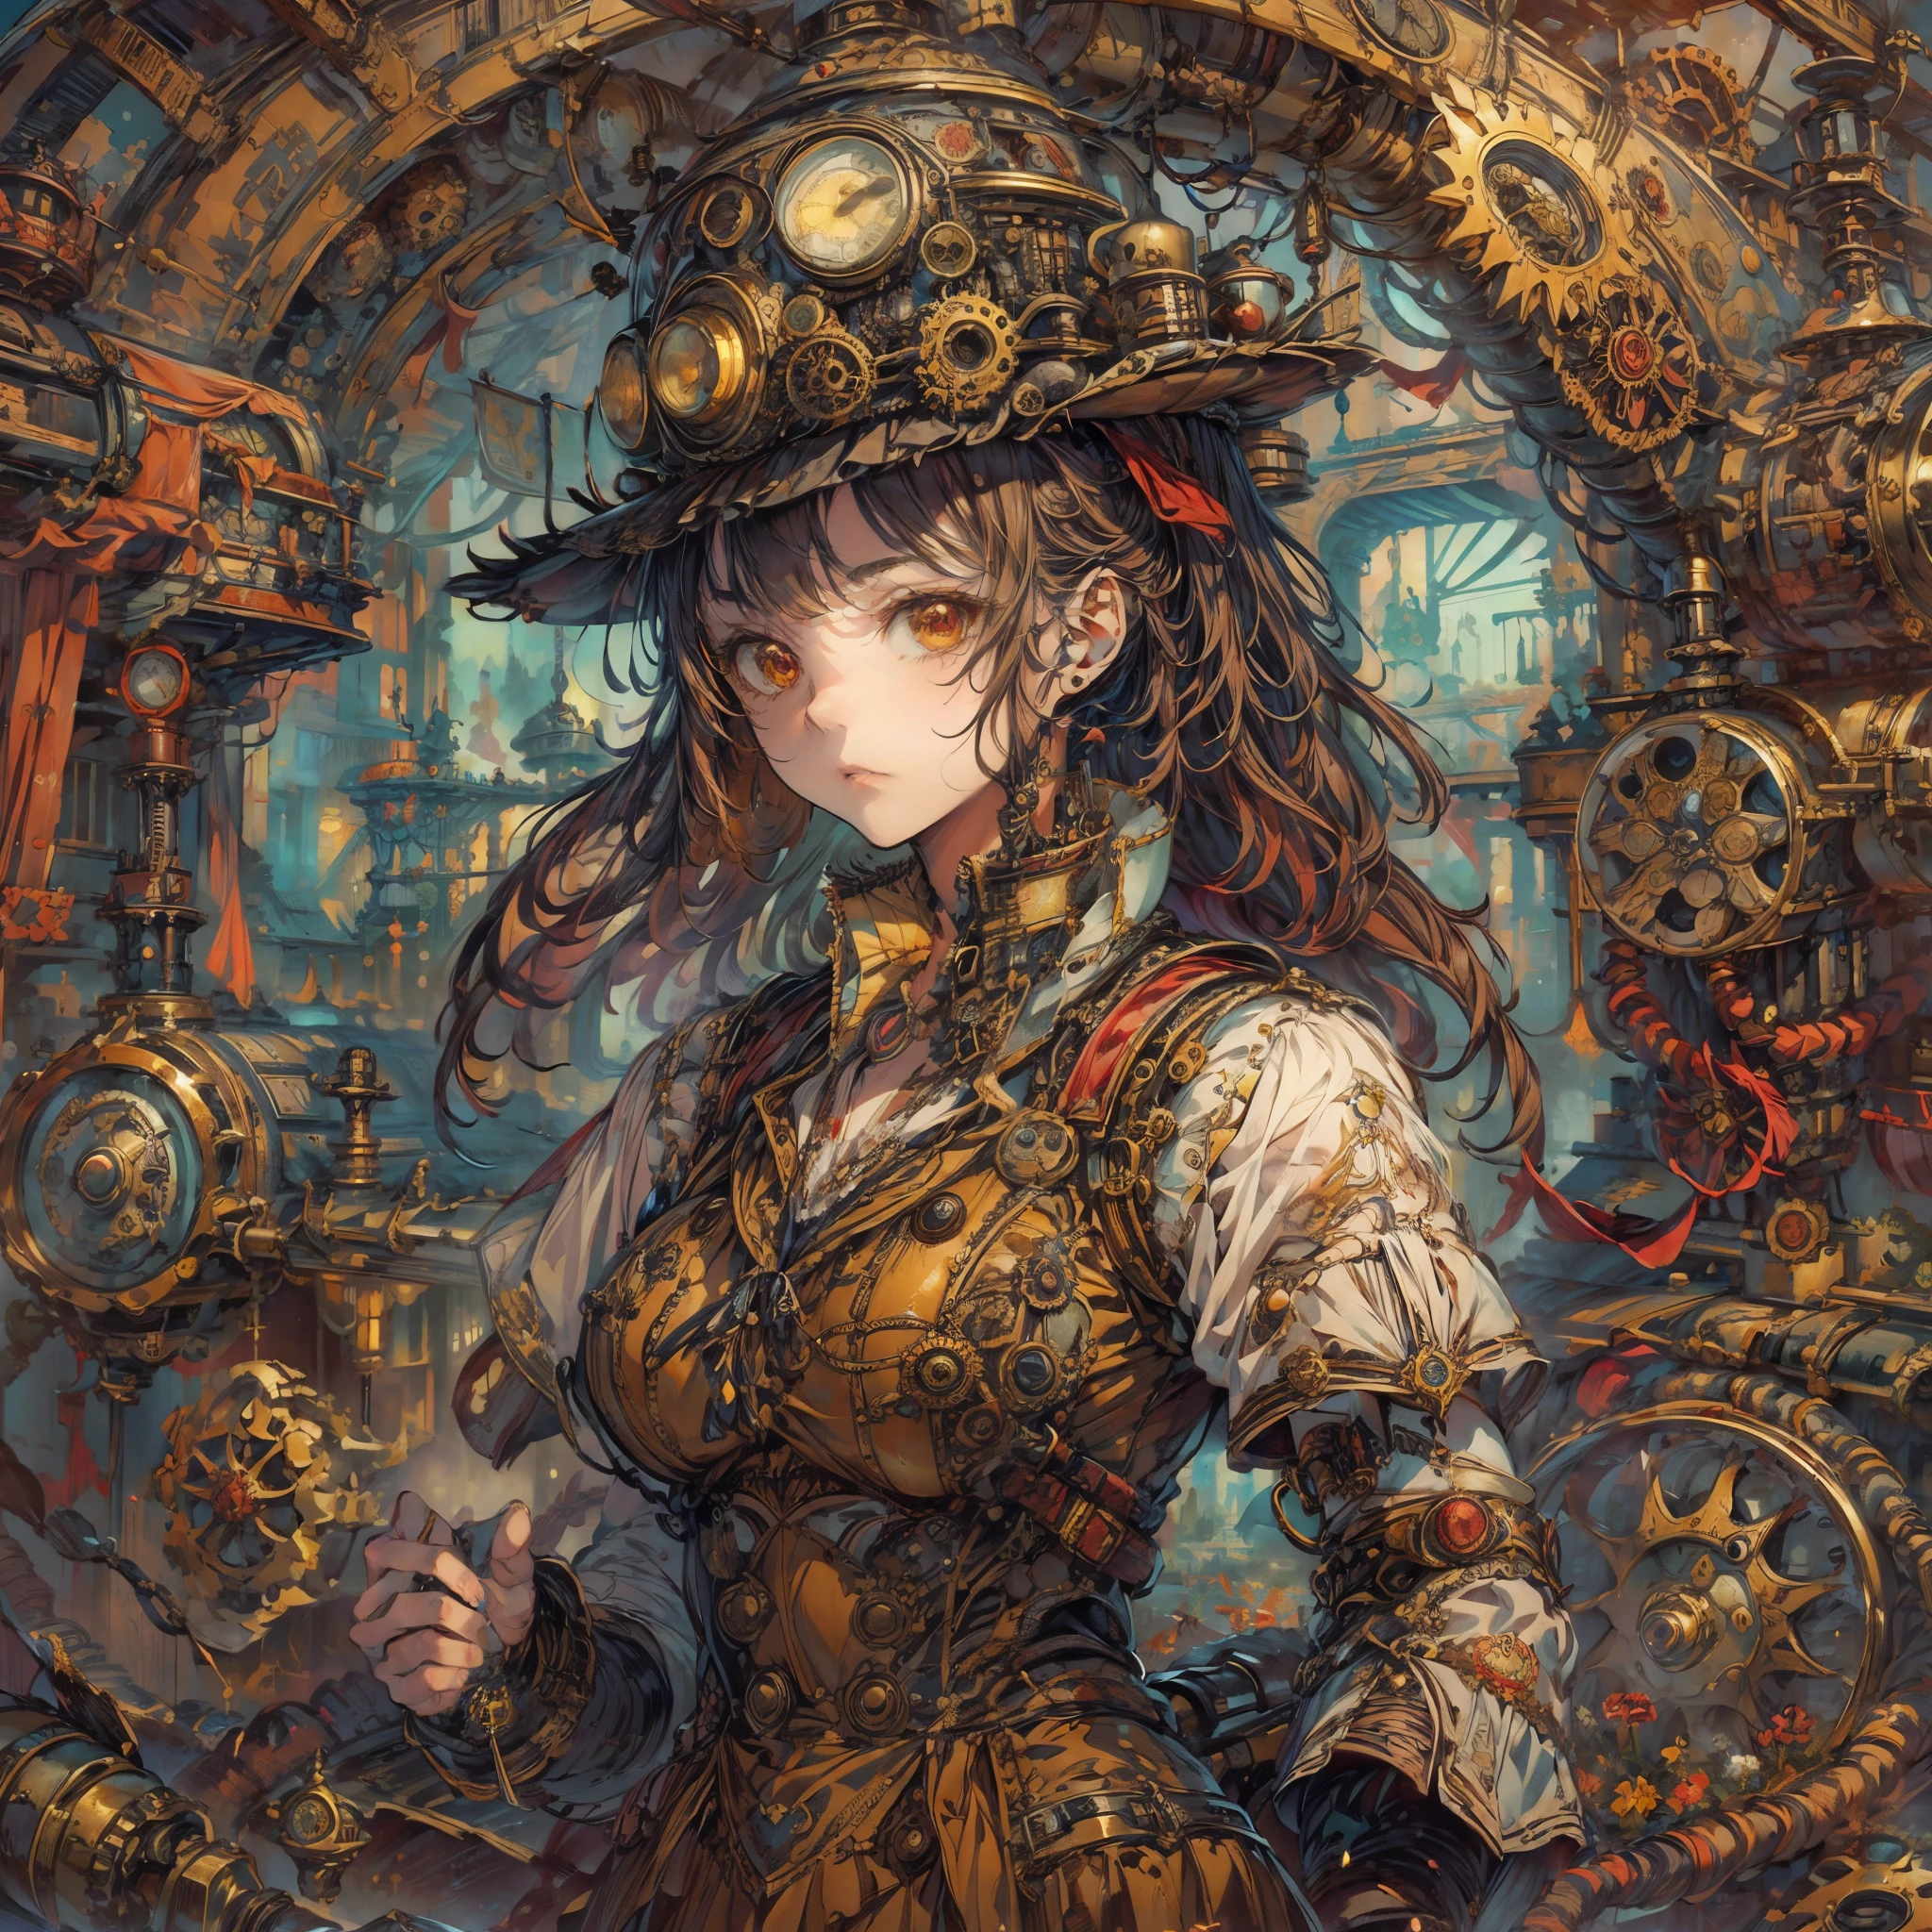 Base Layer: Ultra-detailed painting of a steampunk world, filled with gears, steam engines, industrial revolutionary gadgets, pistons, steam-spouting mufflers, shafts, pressure gauges, and meters, BREAK Middle Layer: Steam Princess, an anime-style kawaii girl, embodying the fusion of Taisho romantic fashion with steampunk decorations and accessories, BREAK Foreground Layer: N/A (No specific additional elements beyond the main character and setting), BREAK Effect Layer: Highlighting the intricate detail of the steampunk background and the unique character design of the Steam Princess, BREAK Final Touches: Creating a harmonious blend of Japanese and steampunk aesthetics, celebrating science and technology.